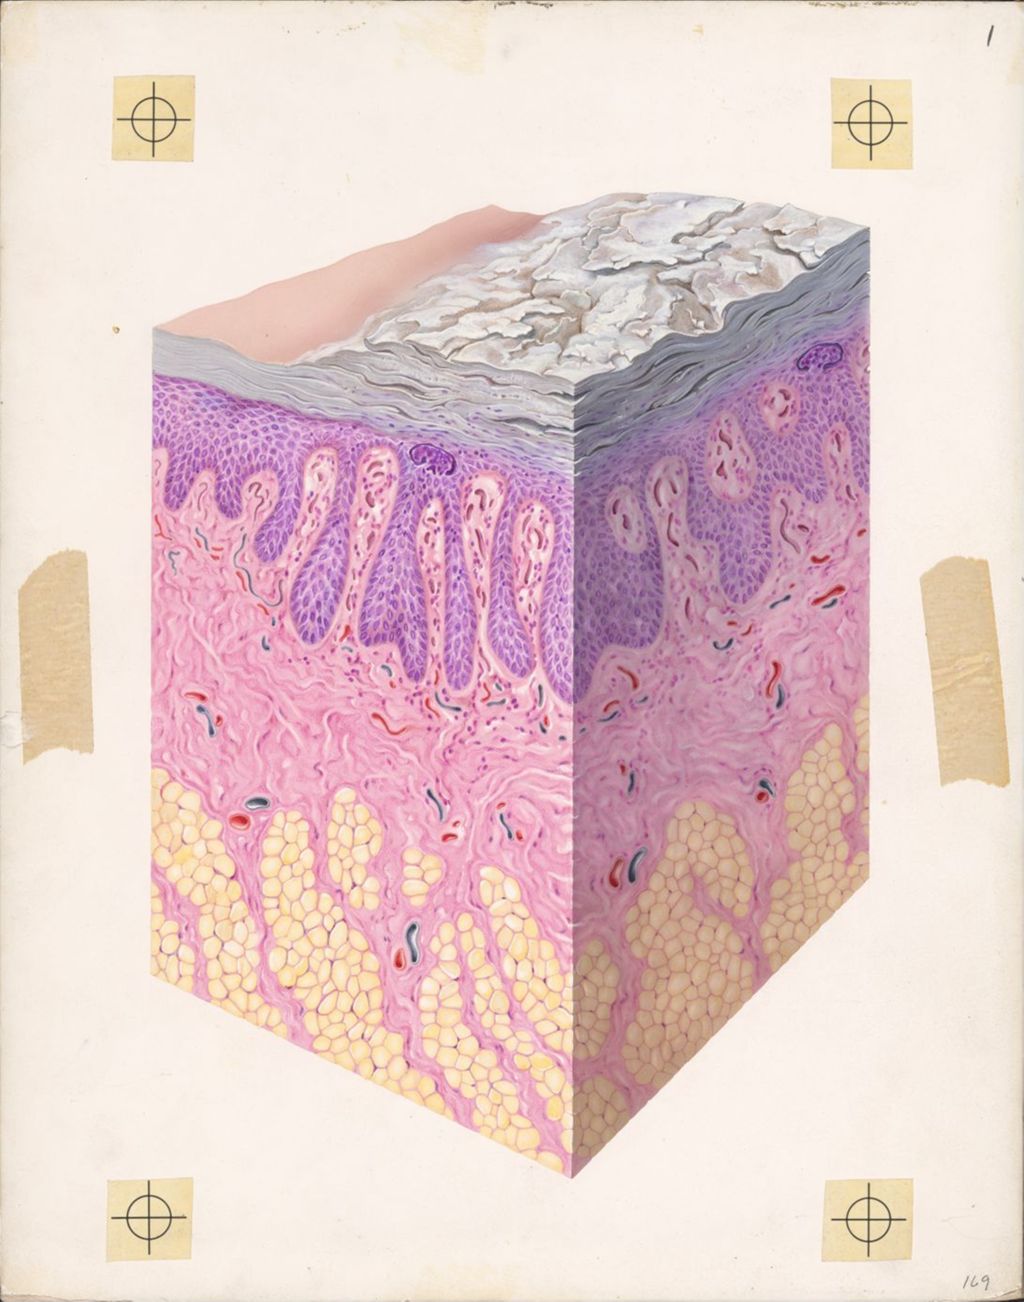 Dermis, In the Area of Junction of Dermis and Hypodermis